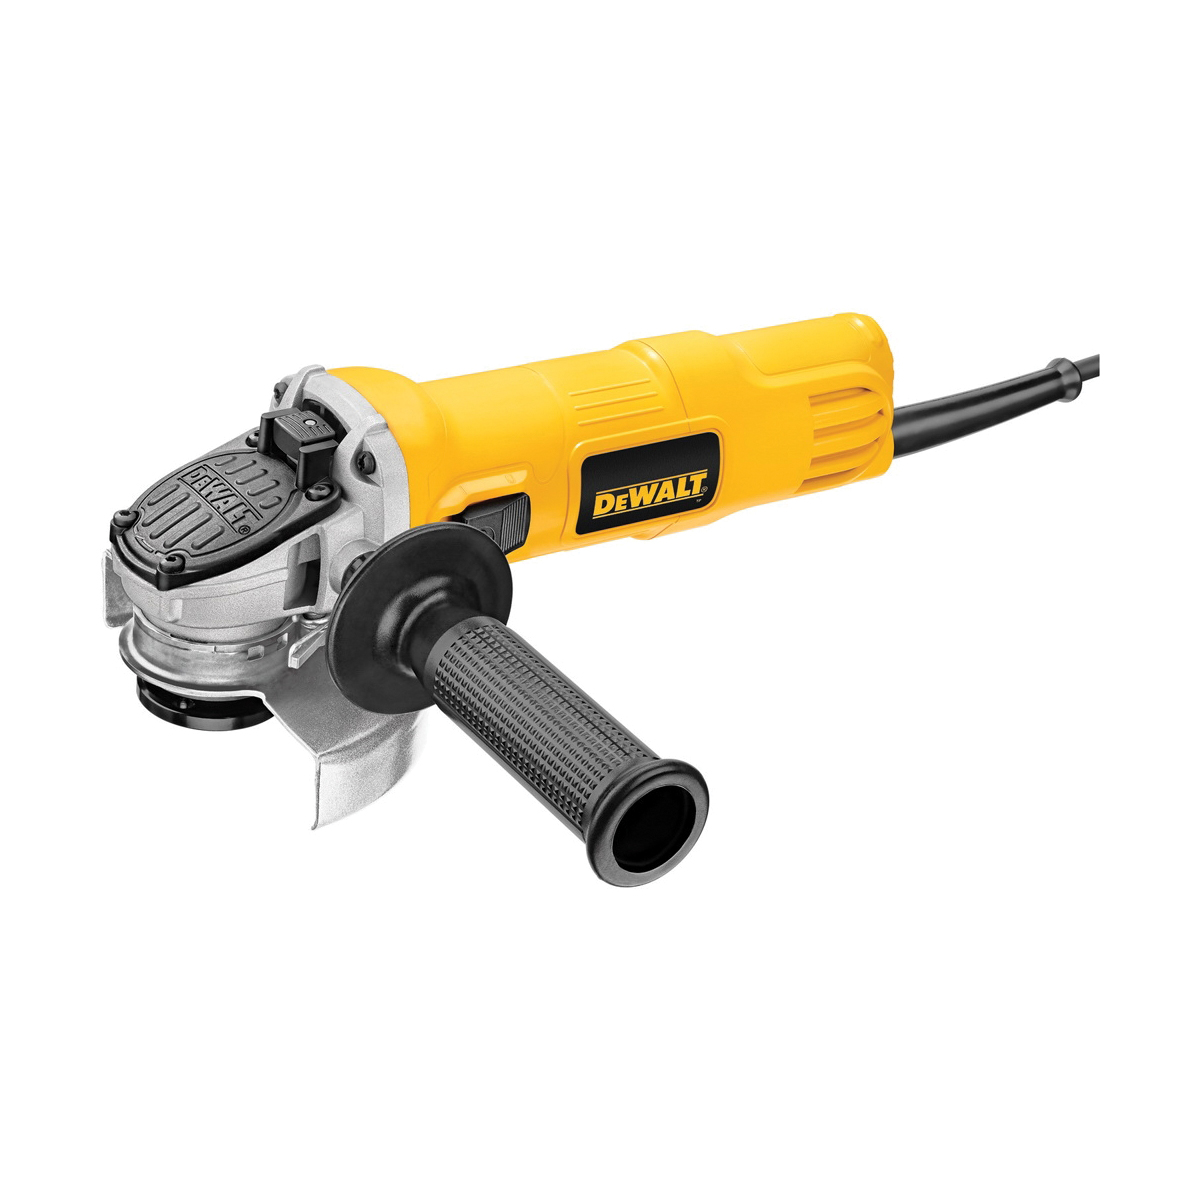 DeWALT® DWE4011 Small Angle Grinder, 4-1/2 in Dia Wheel, 5/8-11 Arbor/Shank, 120 VAC, For Wheel: Quick-Change™, Yellow, No, Slide Switch